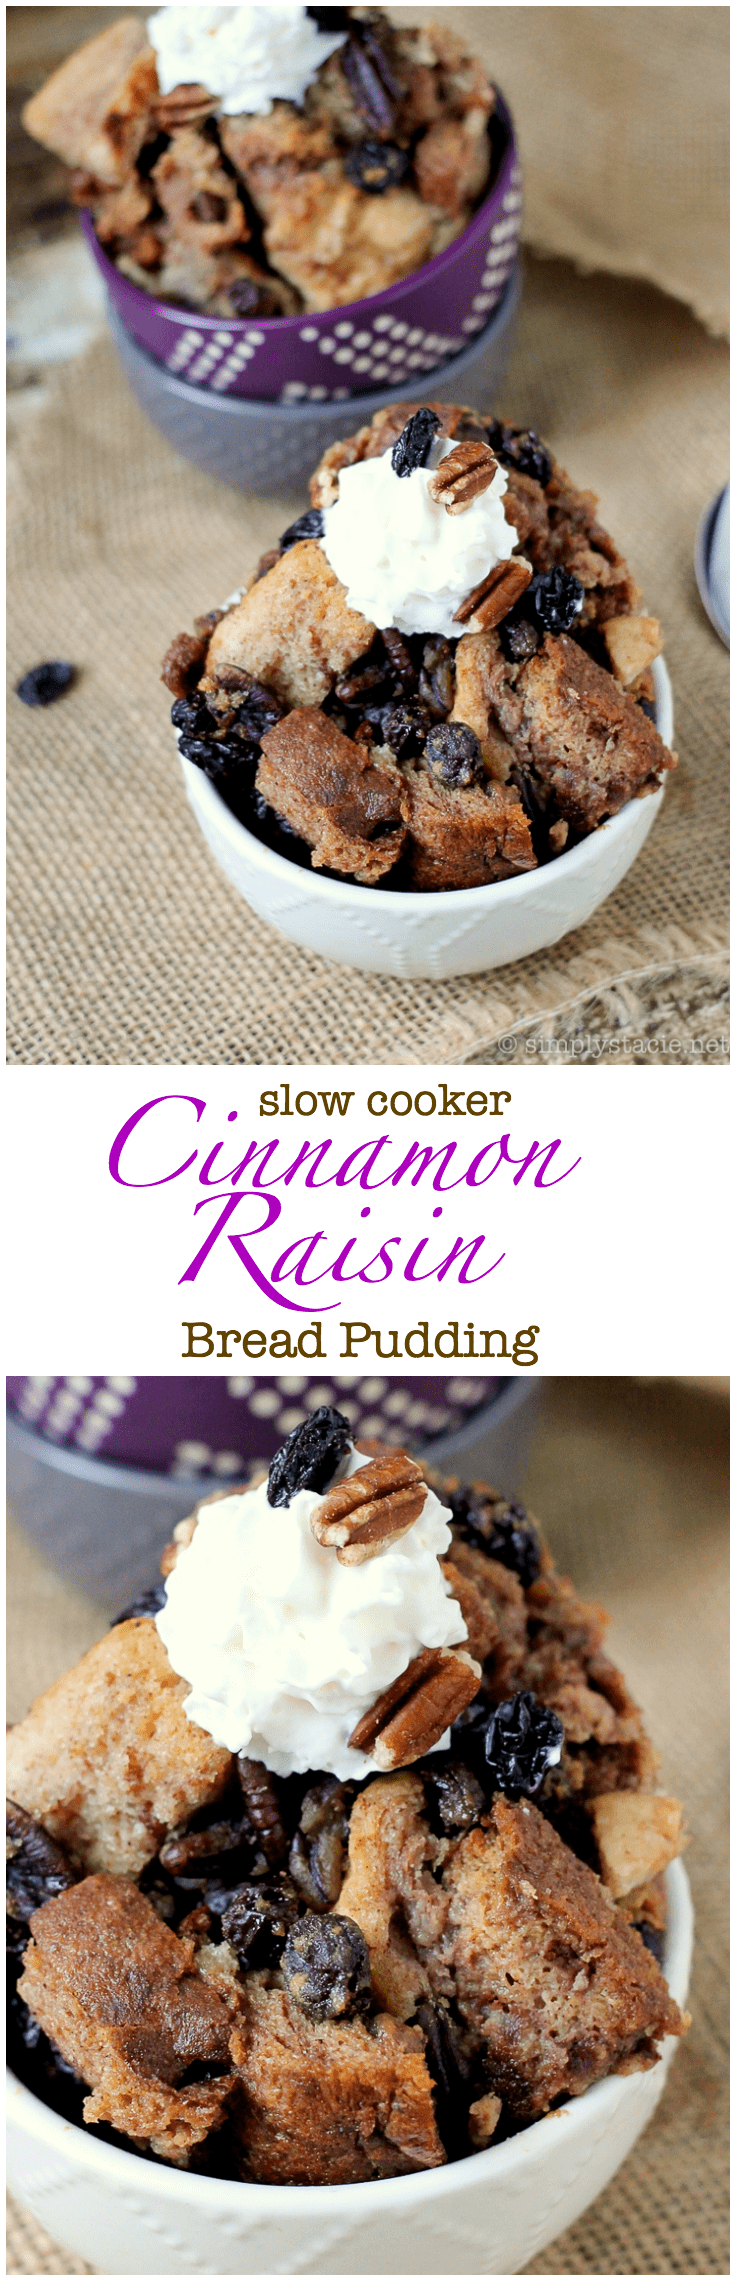 Slow Cooker Cinnamon Raisin Bread Pudding - Slow cooker dessert alert! Make the best sweet comfort food so easily with this recipe.